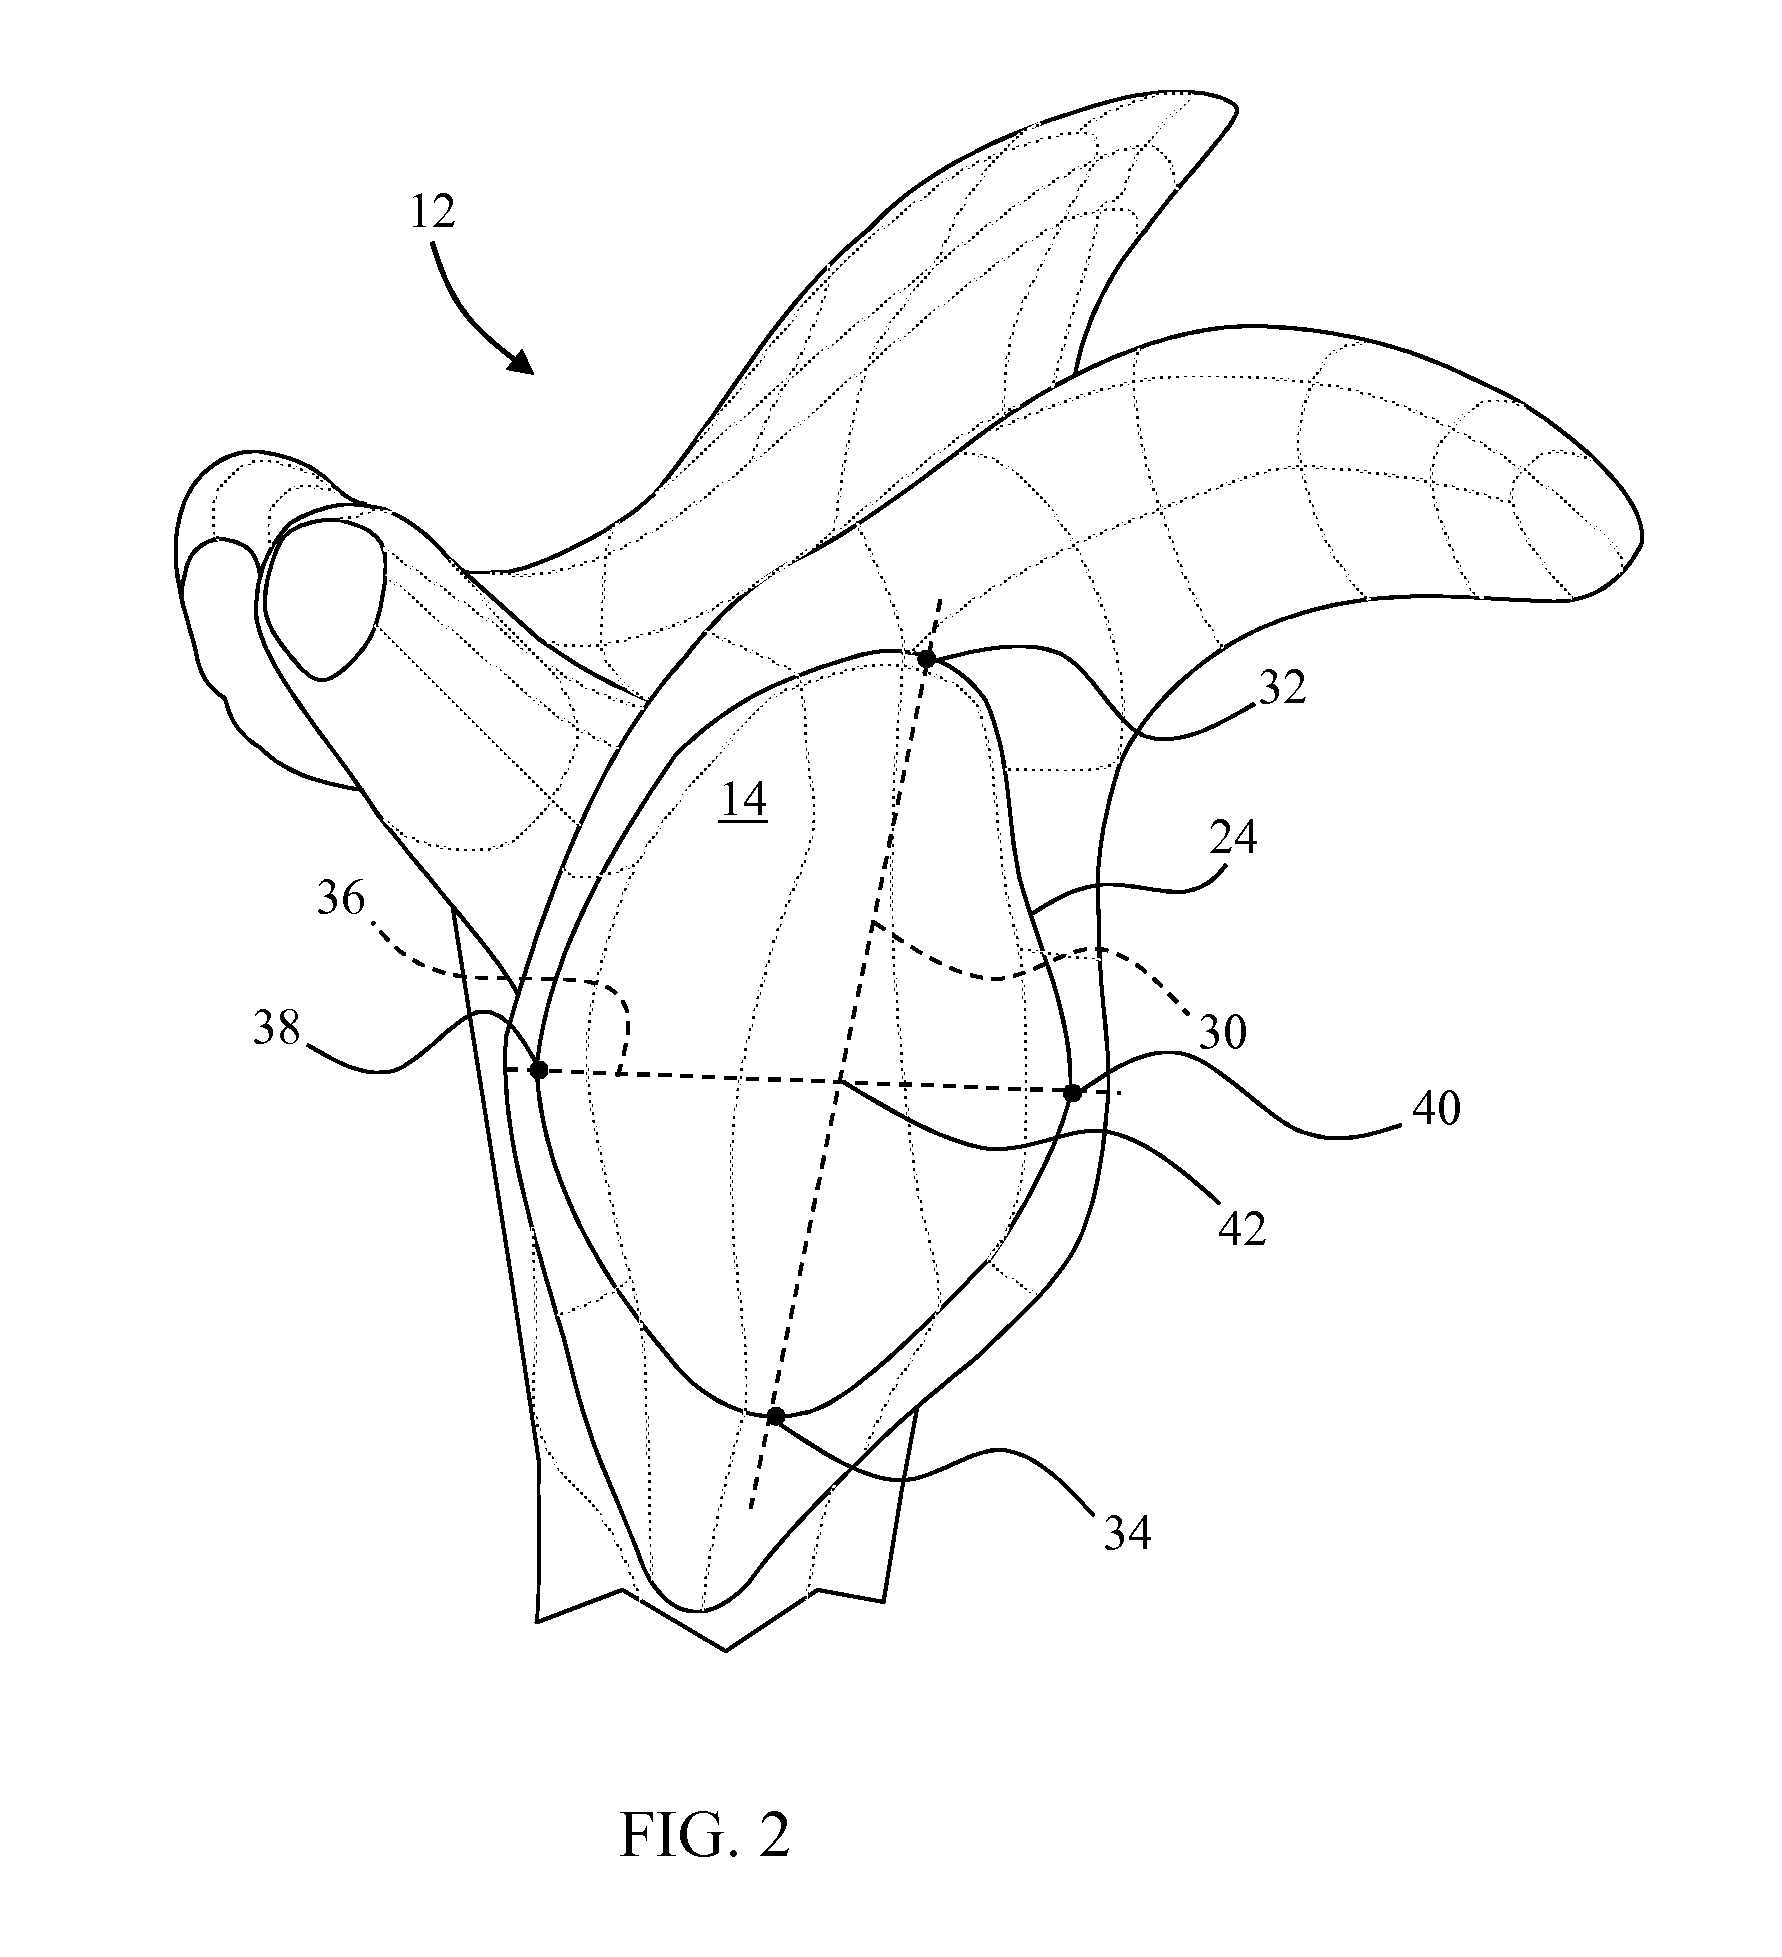 Revision glenoid device and method